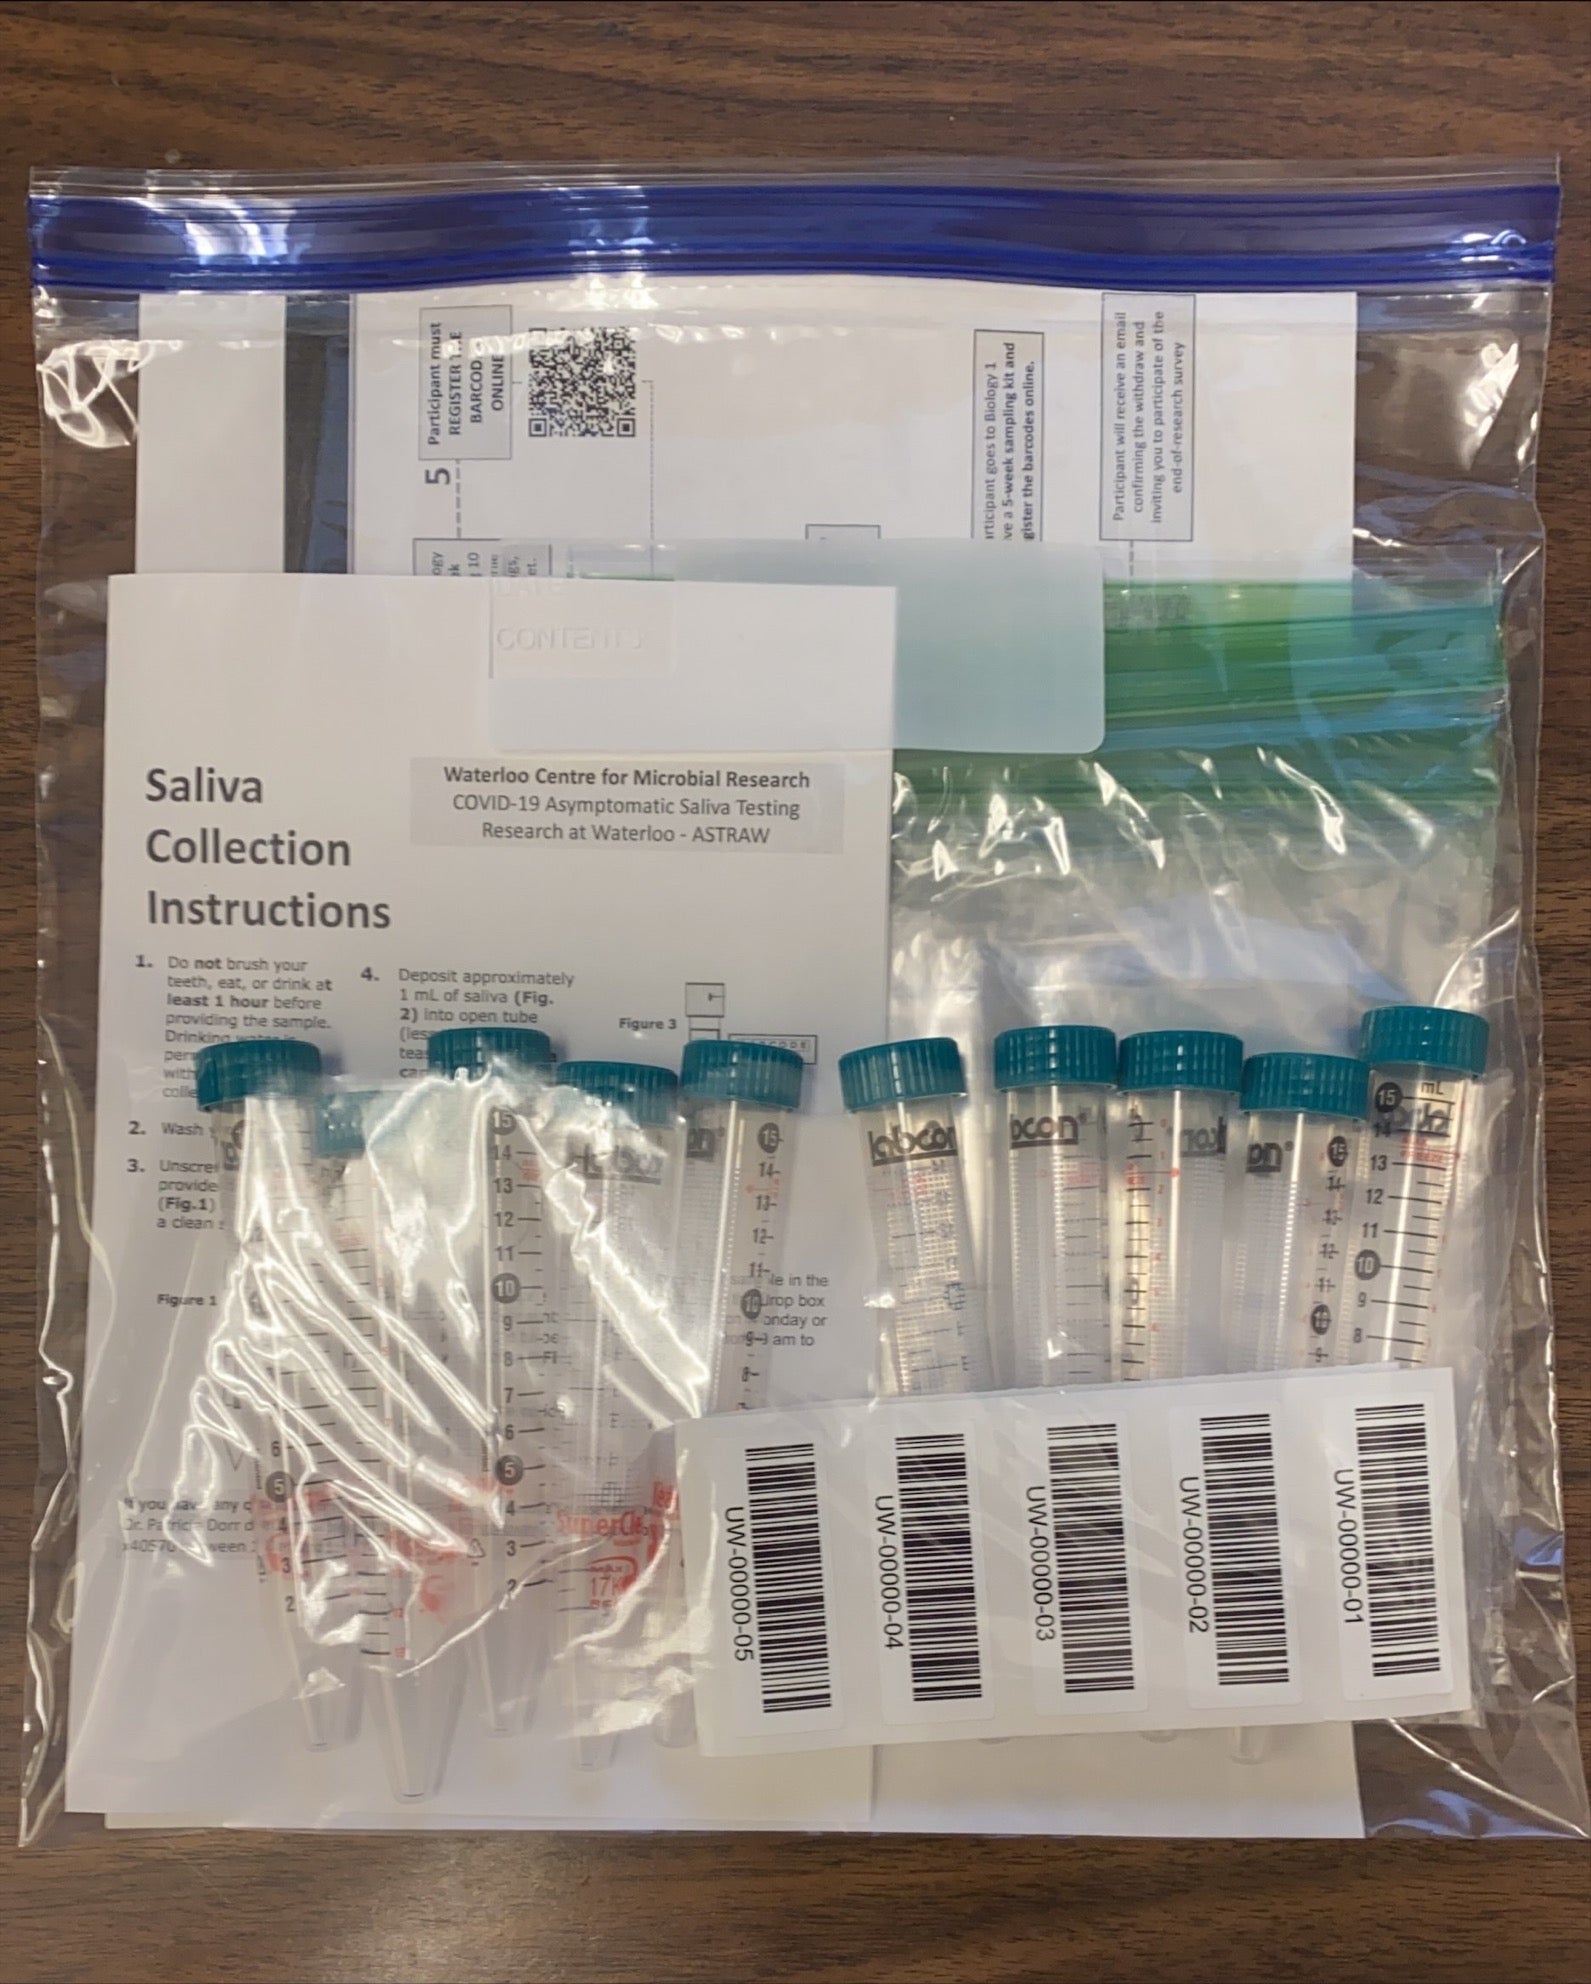 Saliva collection kits are assembled